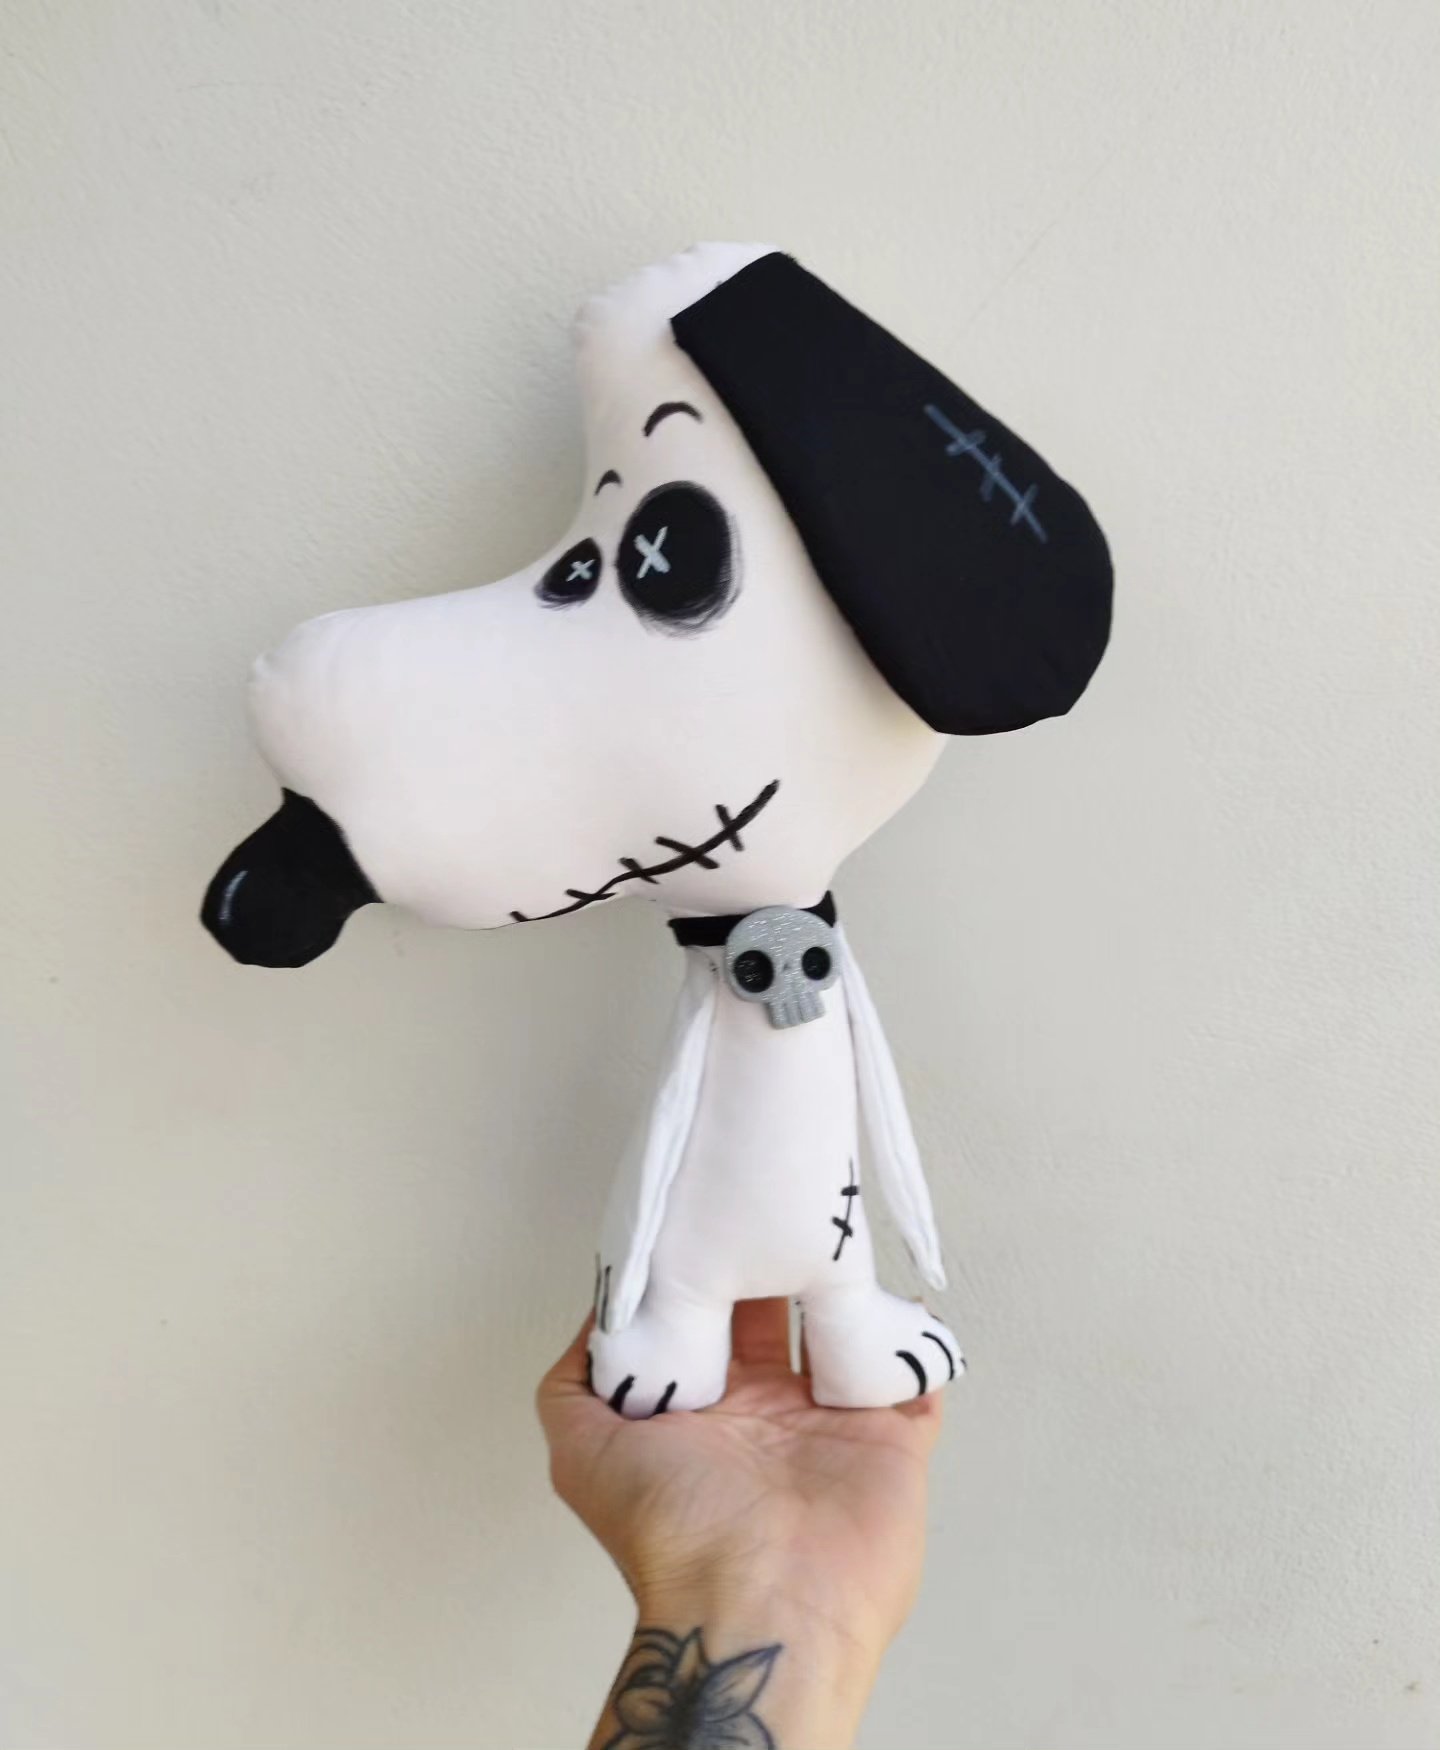 Its Snoopy!!